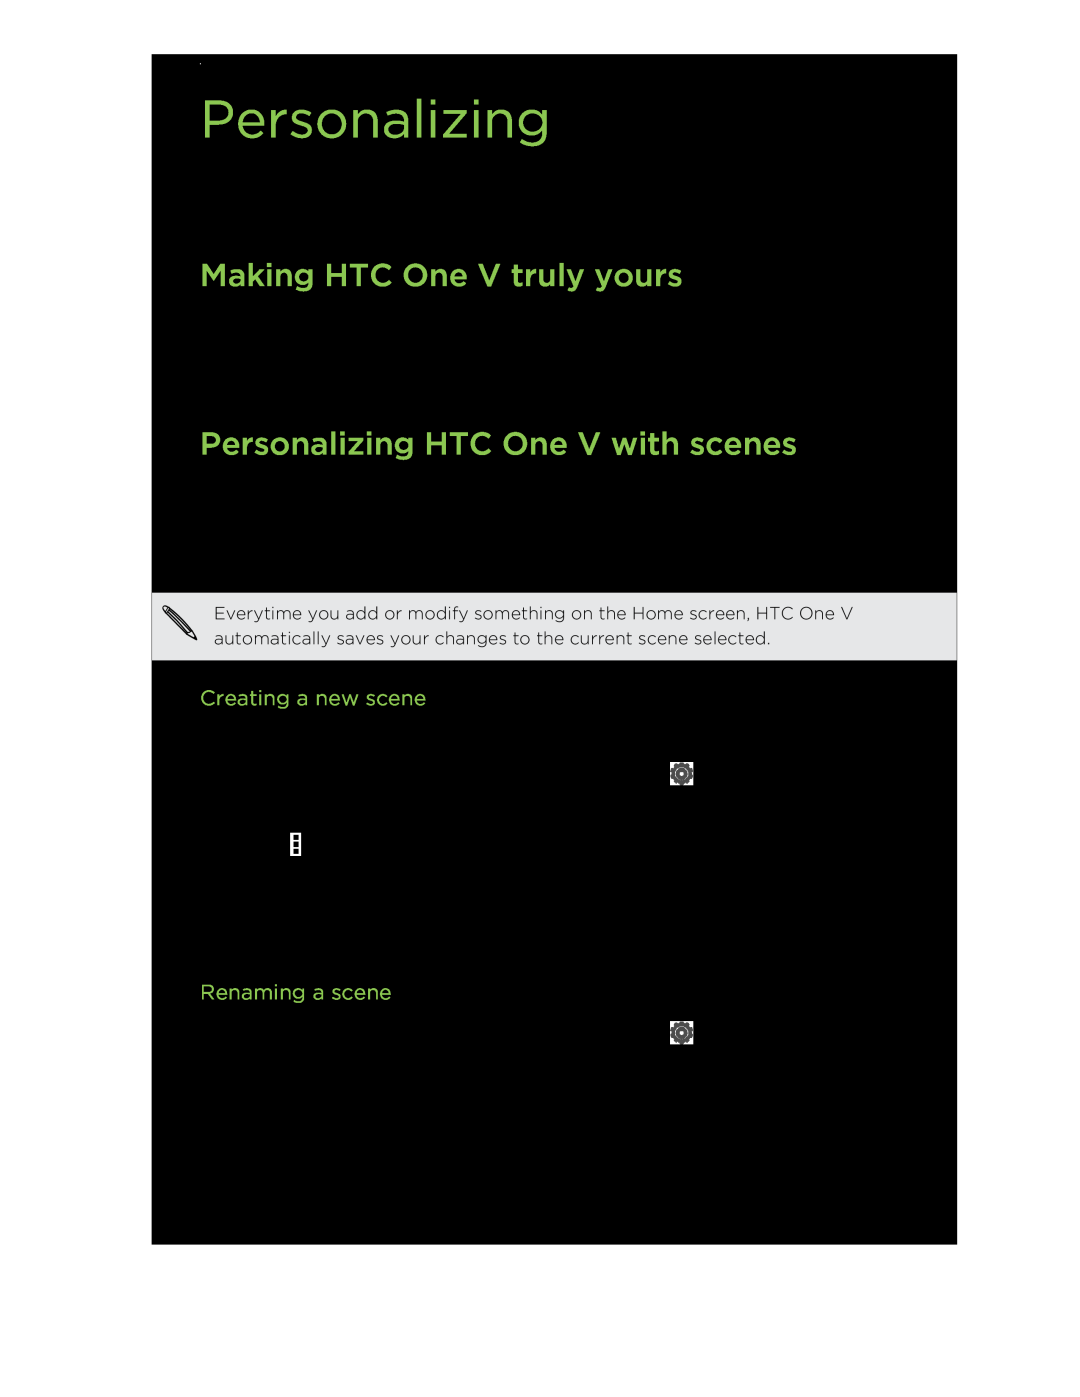 HTC C3HTCONEV4GBUNLOCKEDBLACK Making HTC One V truly yours, Personalizing HTC One V with scenes, Creating a new scene 